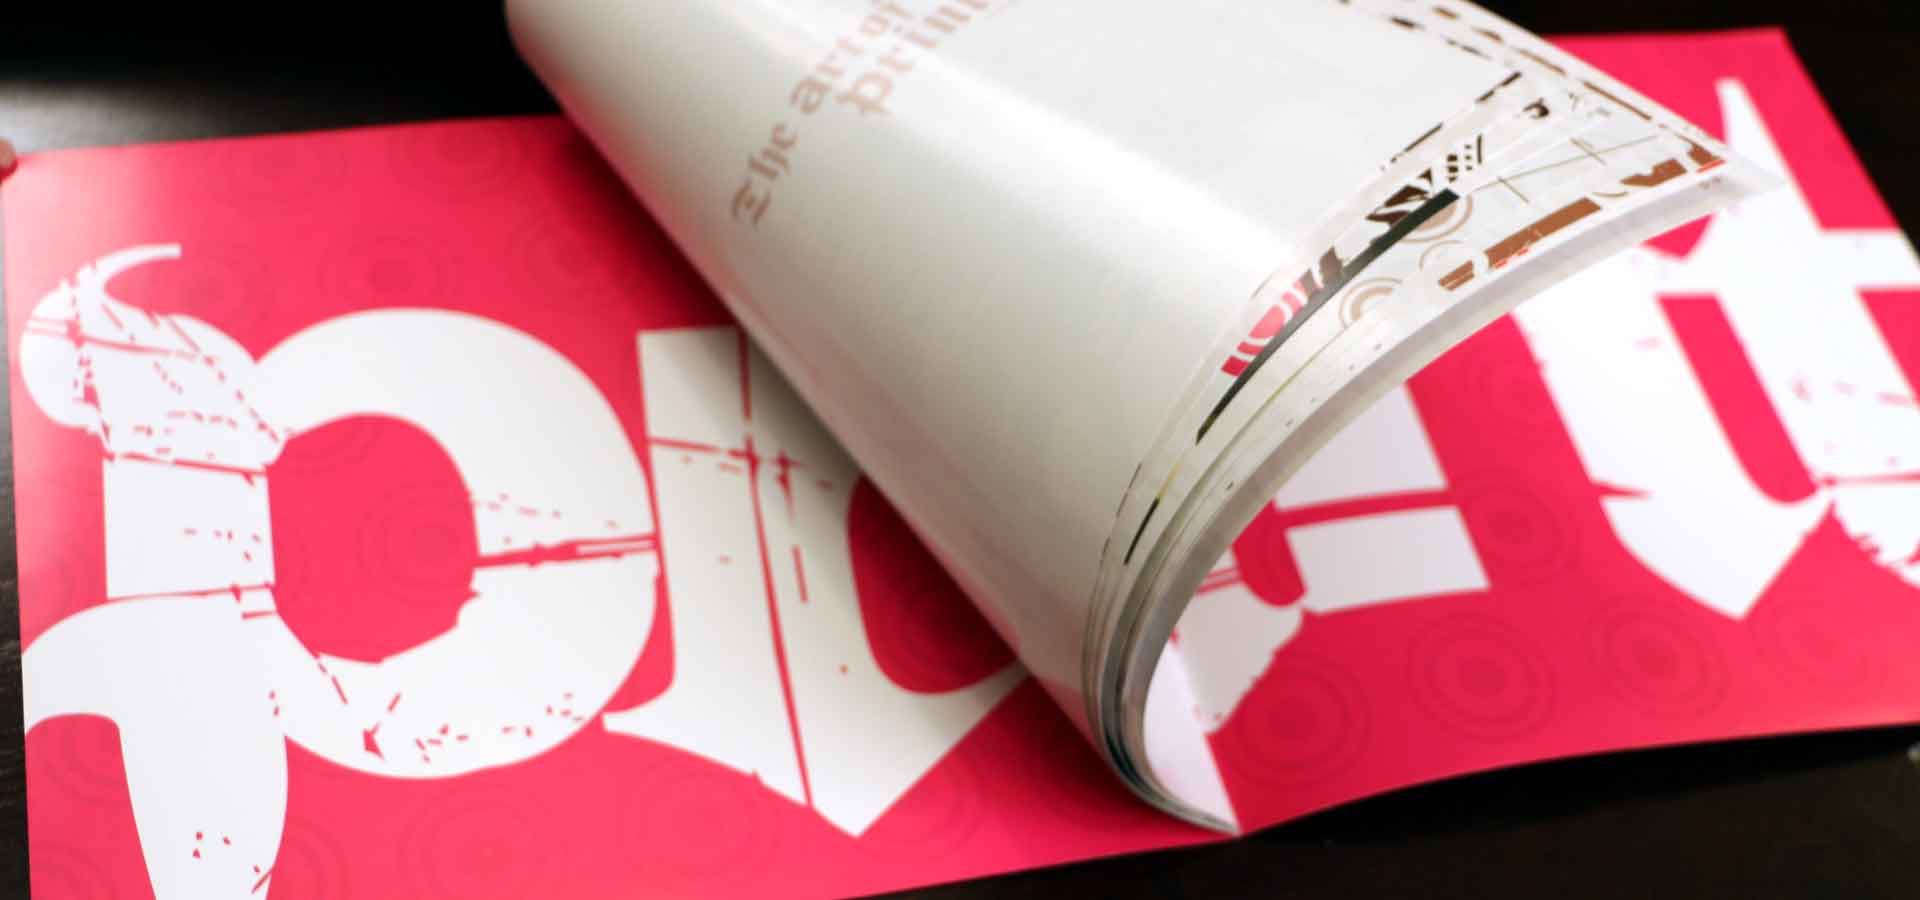 The Art of Printing Publication Design